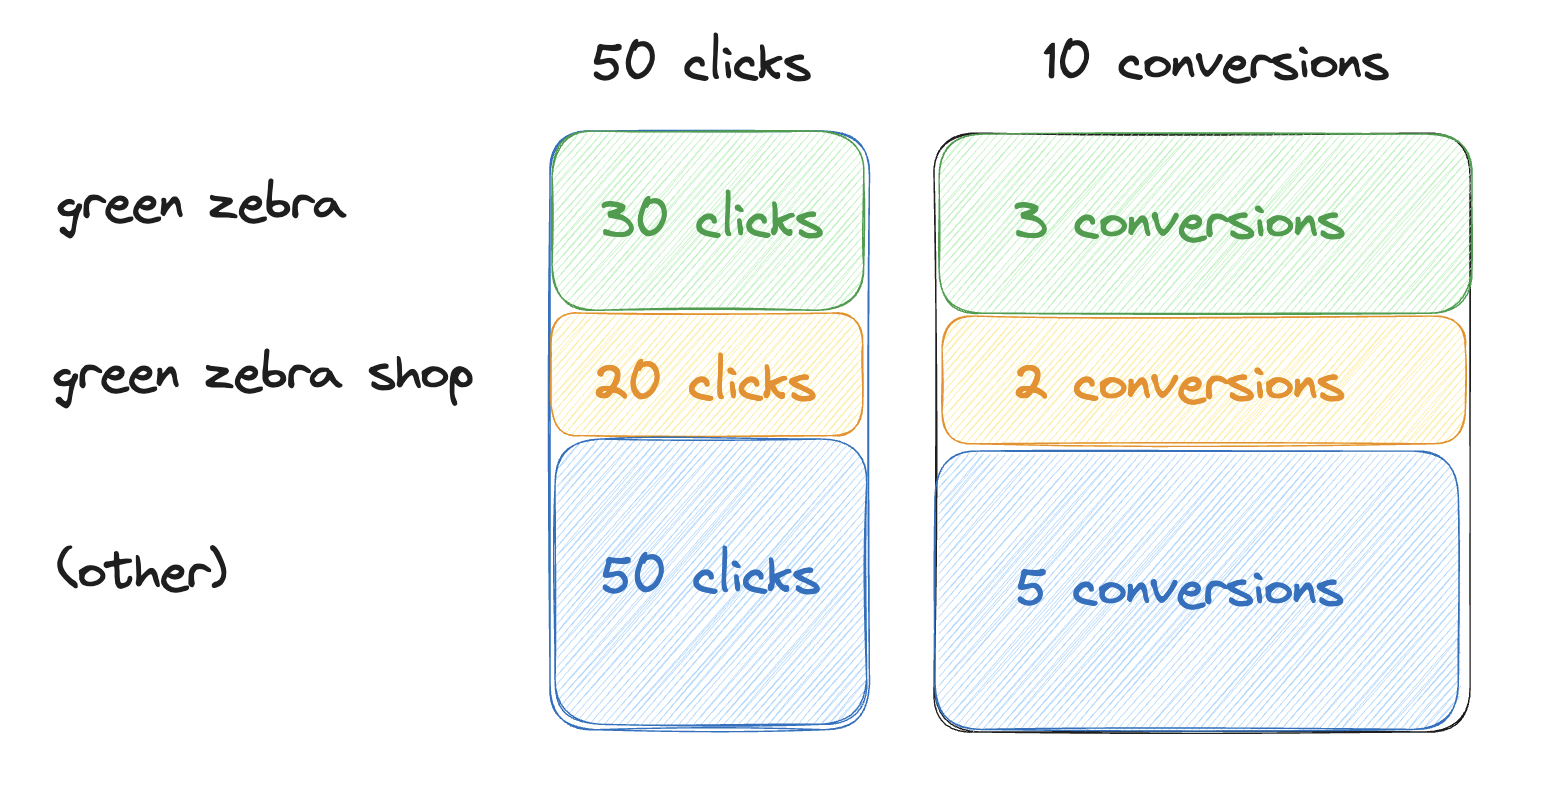 `(other)` has  50 clicks & 50 conversions then `my brand` has 30 clicks & 30 conversions and `my brand shop`  has 20 clicks & 20 conversions